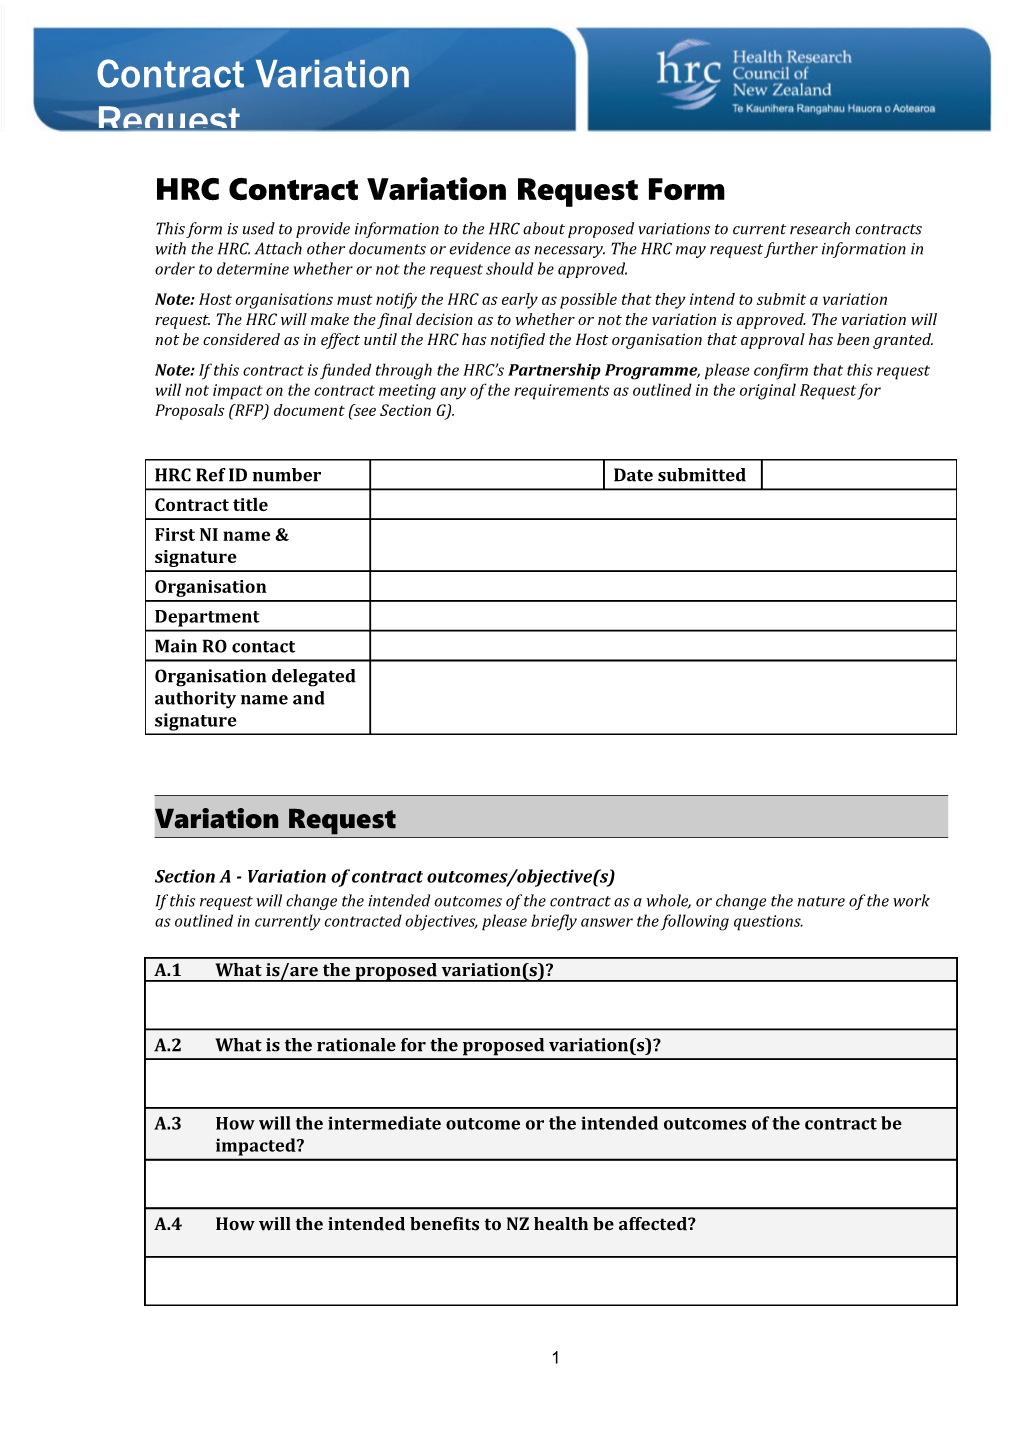 HRC Contract Variation Request Form